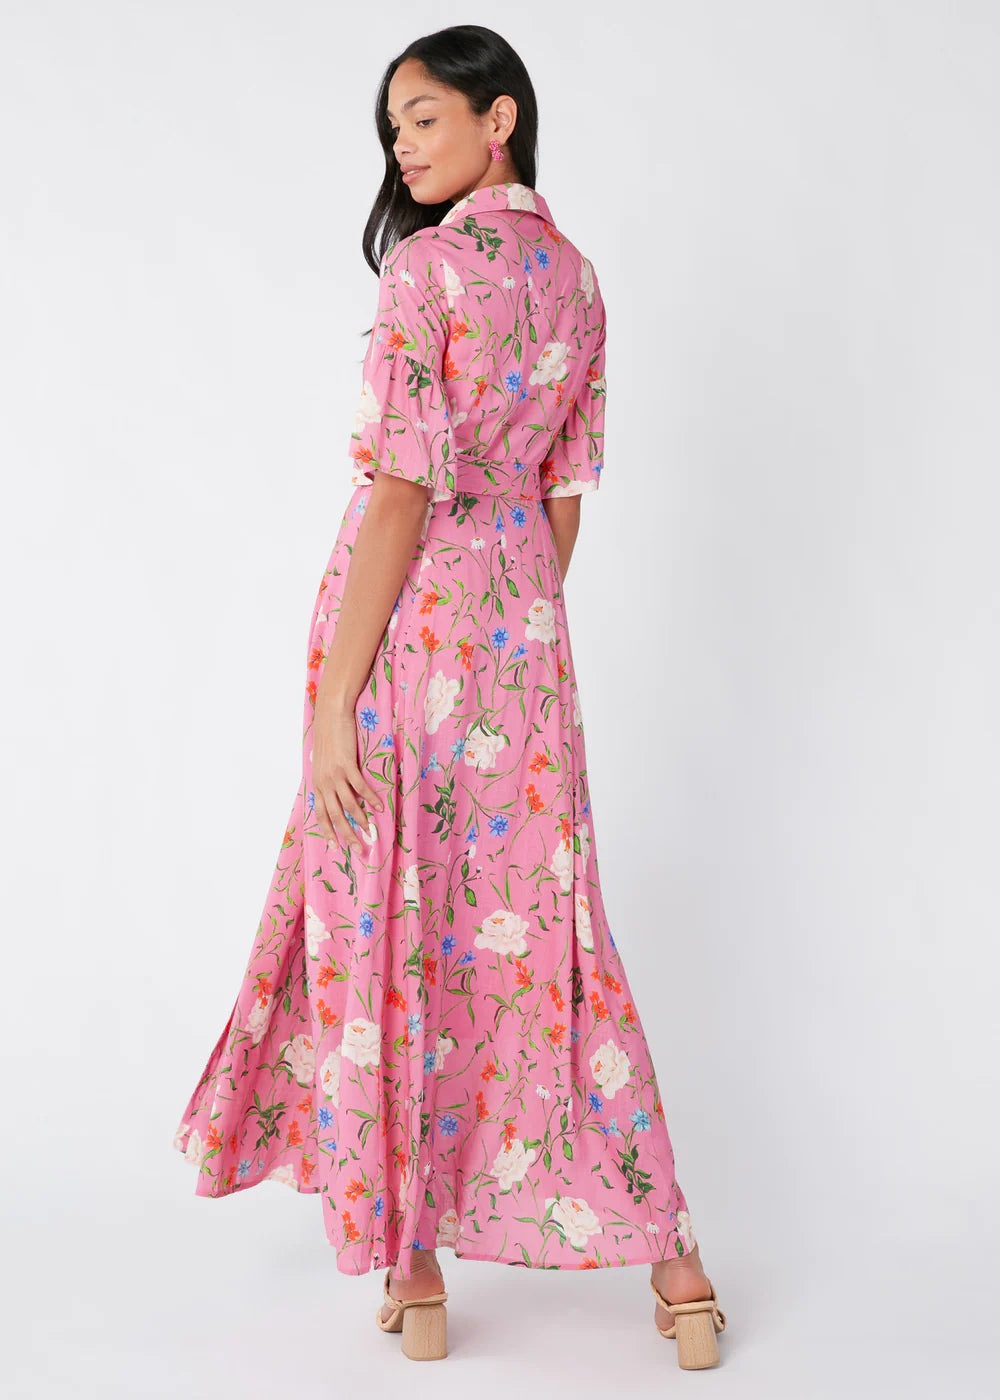 ABBEY GLASS Charlotte Gown Tossed Floral - pink